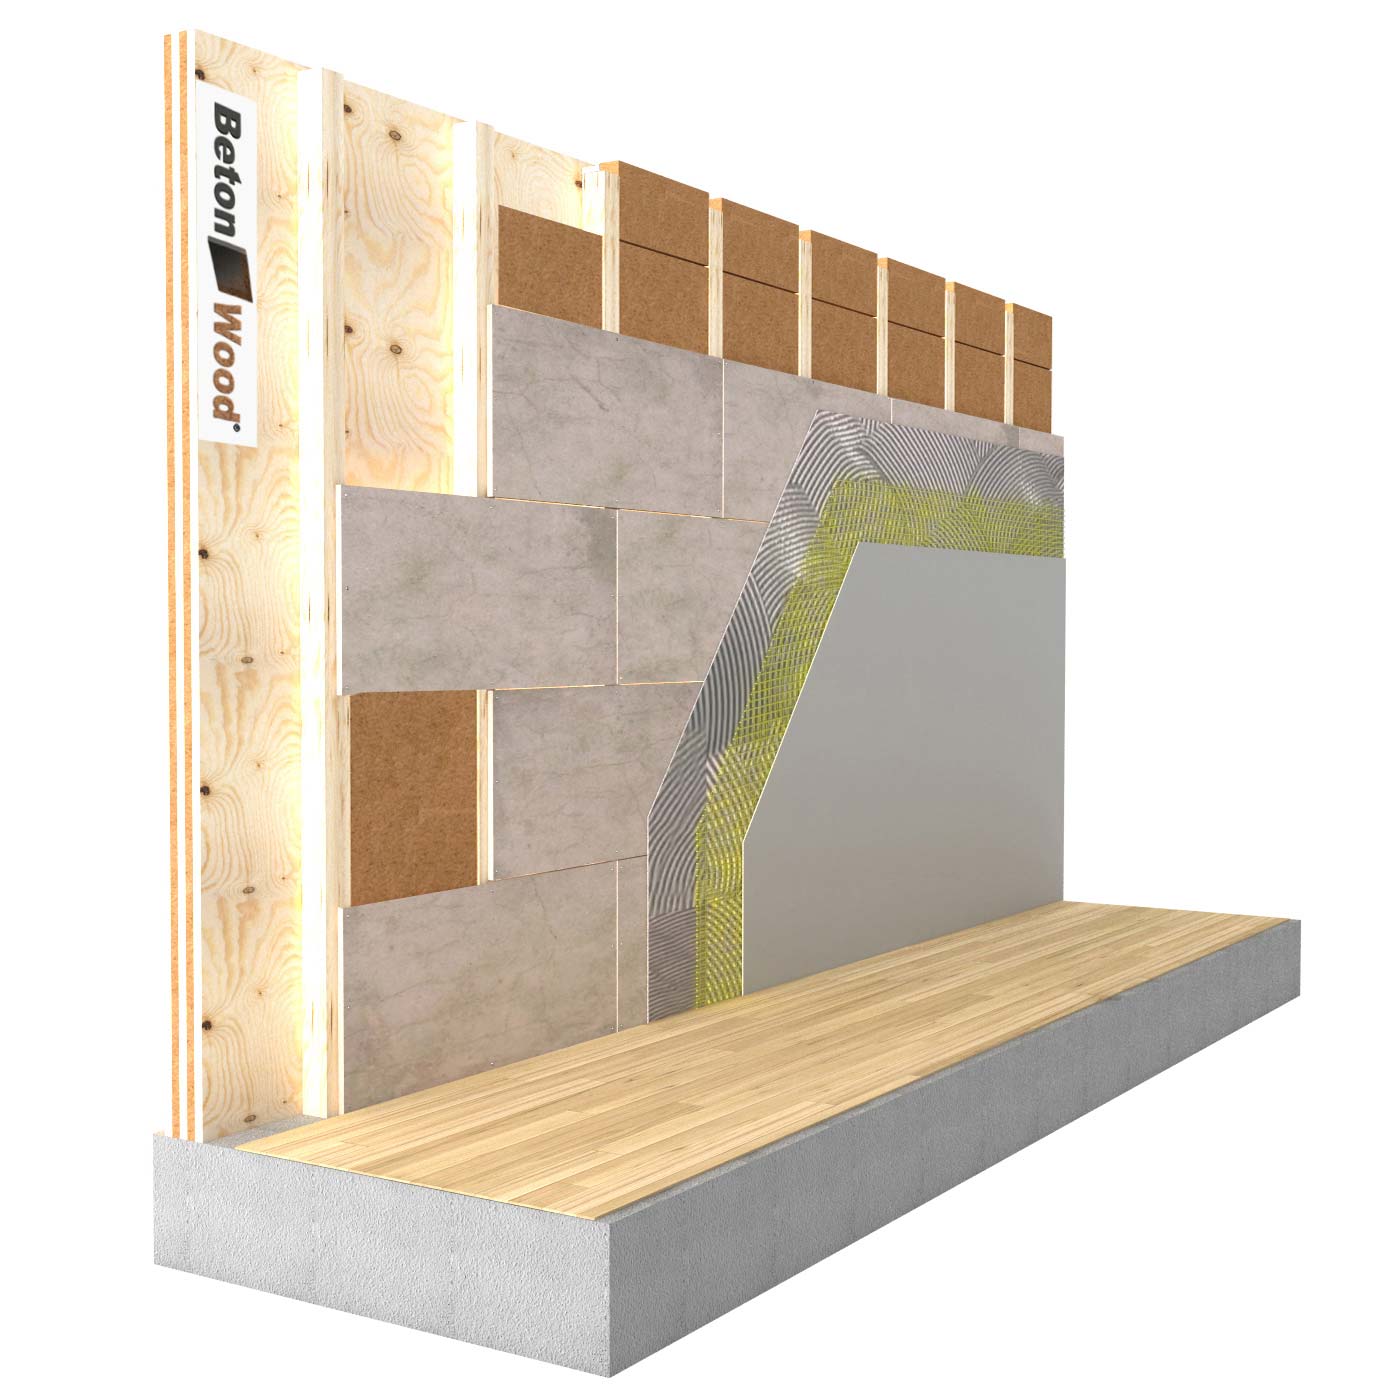 Internal insulation system with Therm SD fiber wood on wooden walls